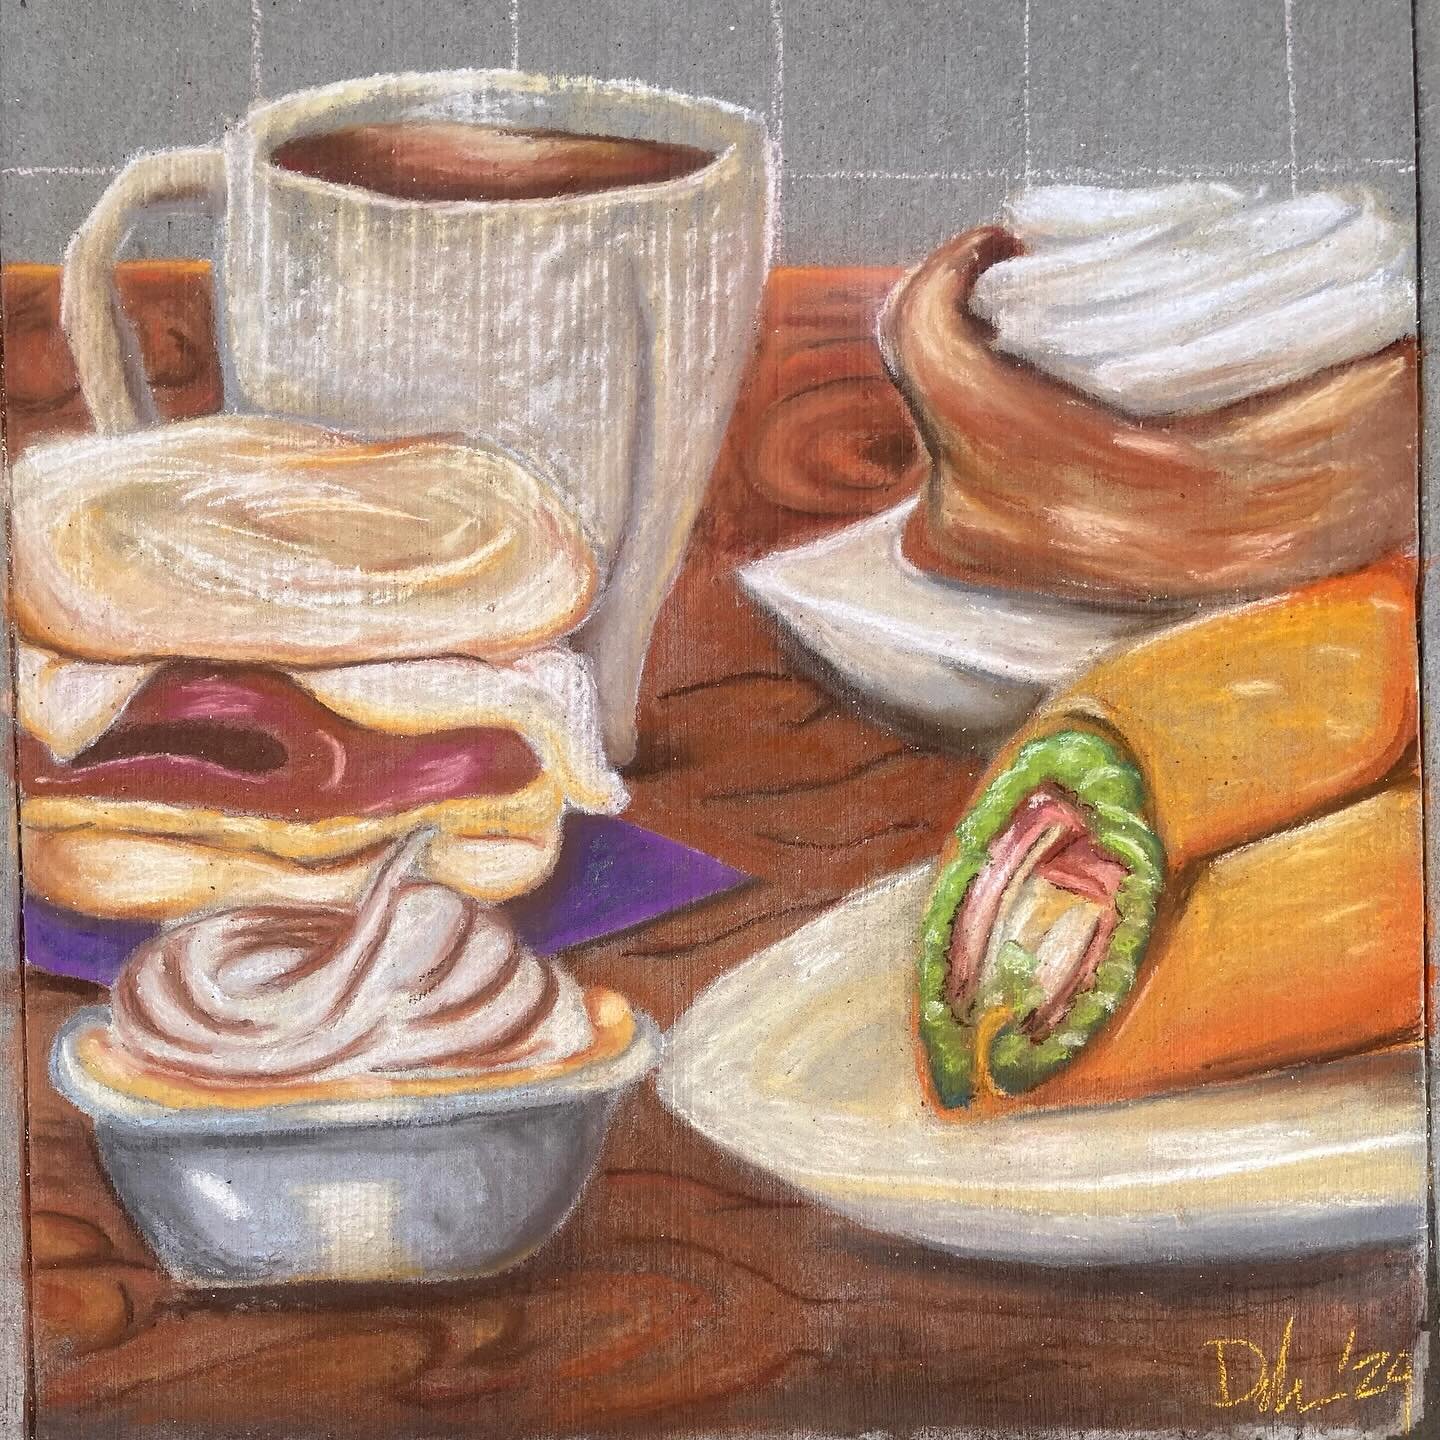 We are off to a good start of a busy summer! Today, at Sweet and Savory, I illustrated a handful of the shop&rsquo;s goods as a 6x6ft chalk piece. It was the perfect day, and Sweet and Savory was a blast to work with!

Come check it out, fully unveil